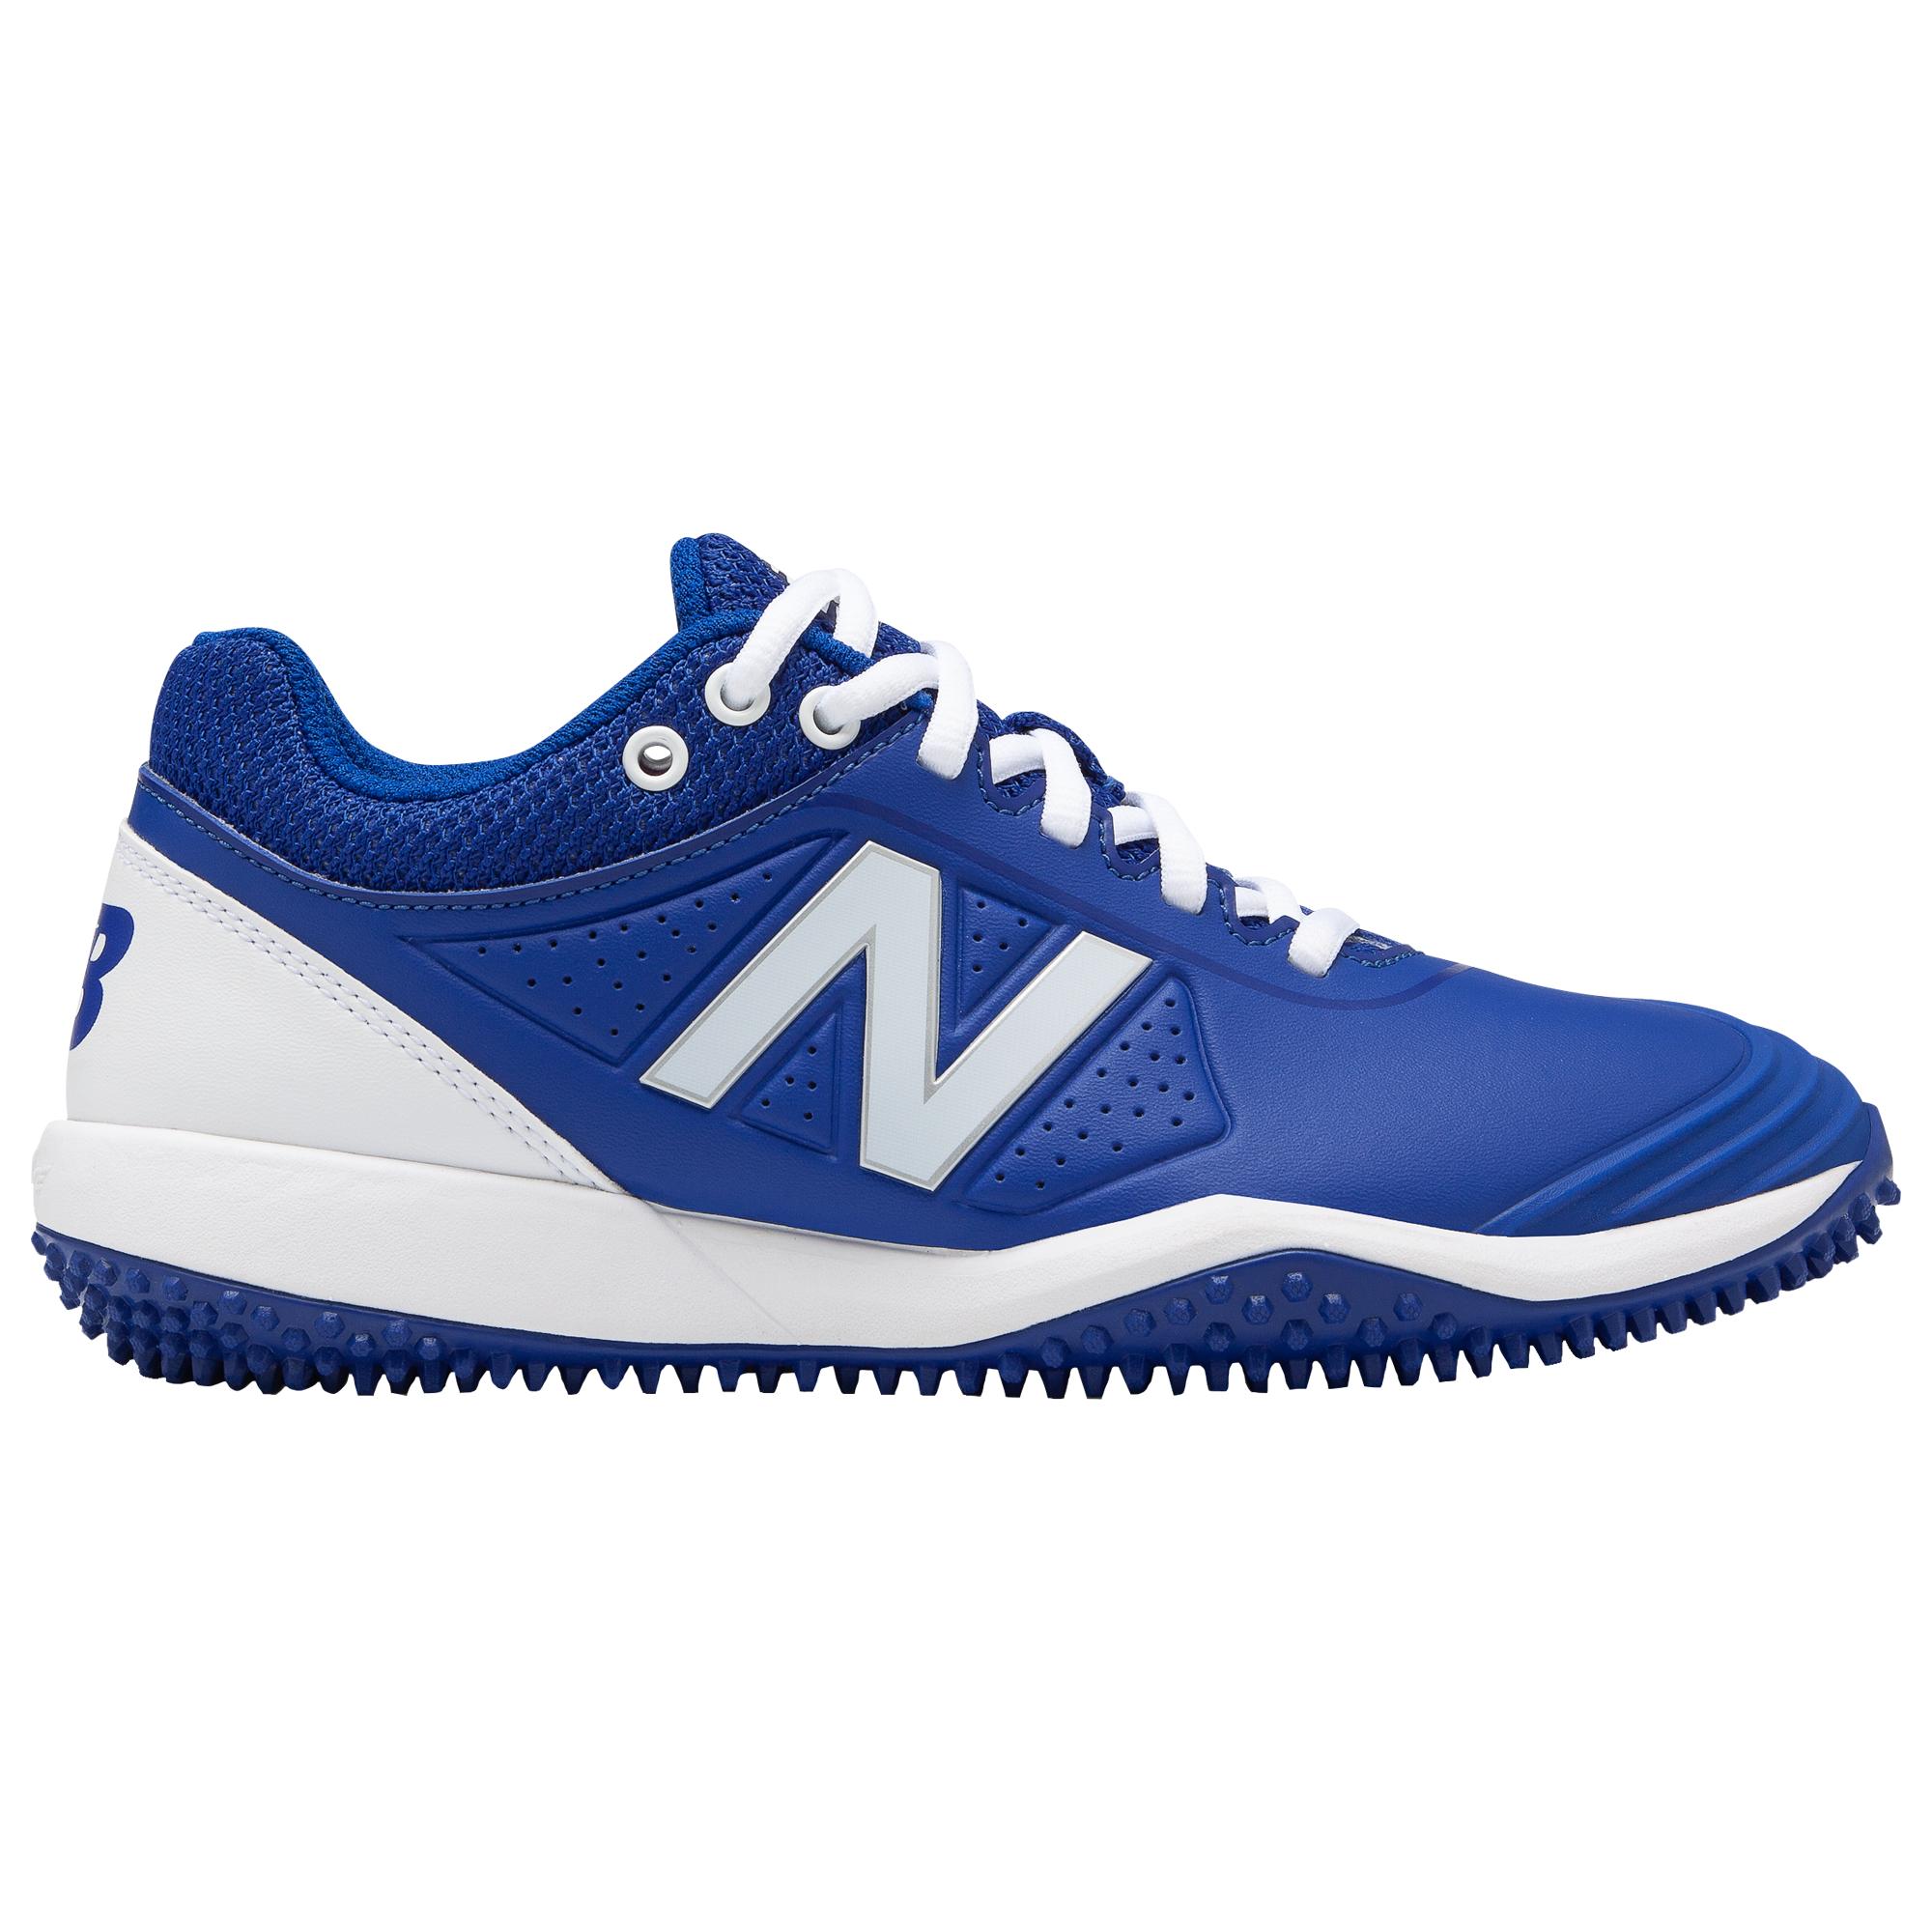 New Balance Synthetic Fusev2 Turf Turf Shoes in Blue - Lyst